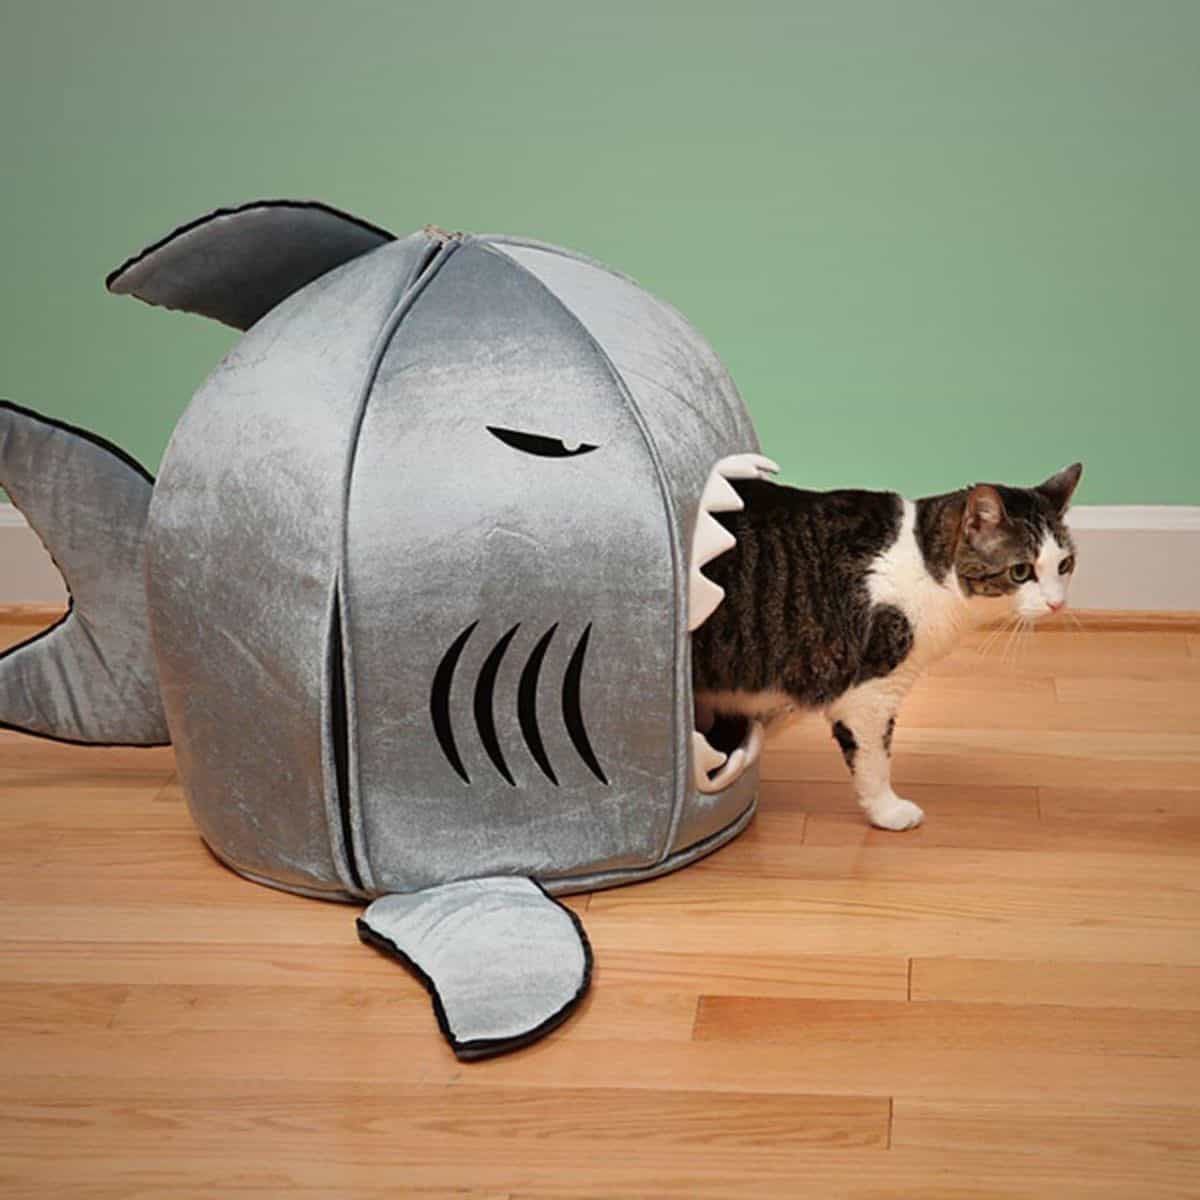 Shark Shape Cat Tunnel (View 5 of 10)